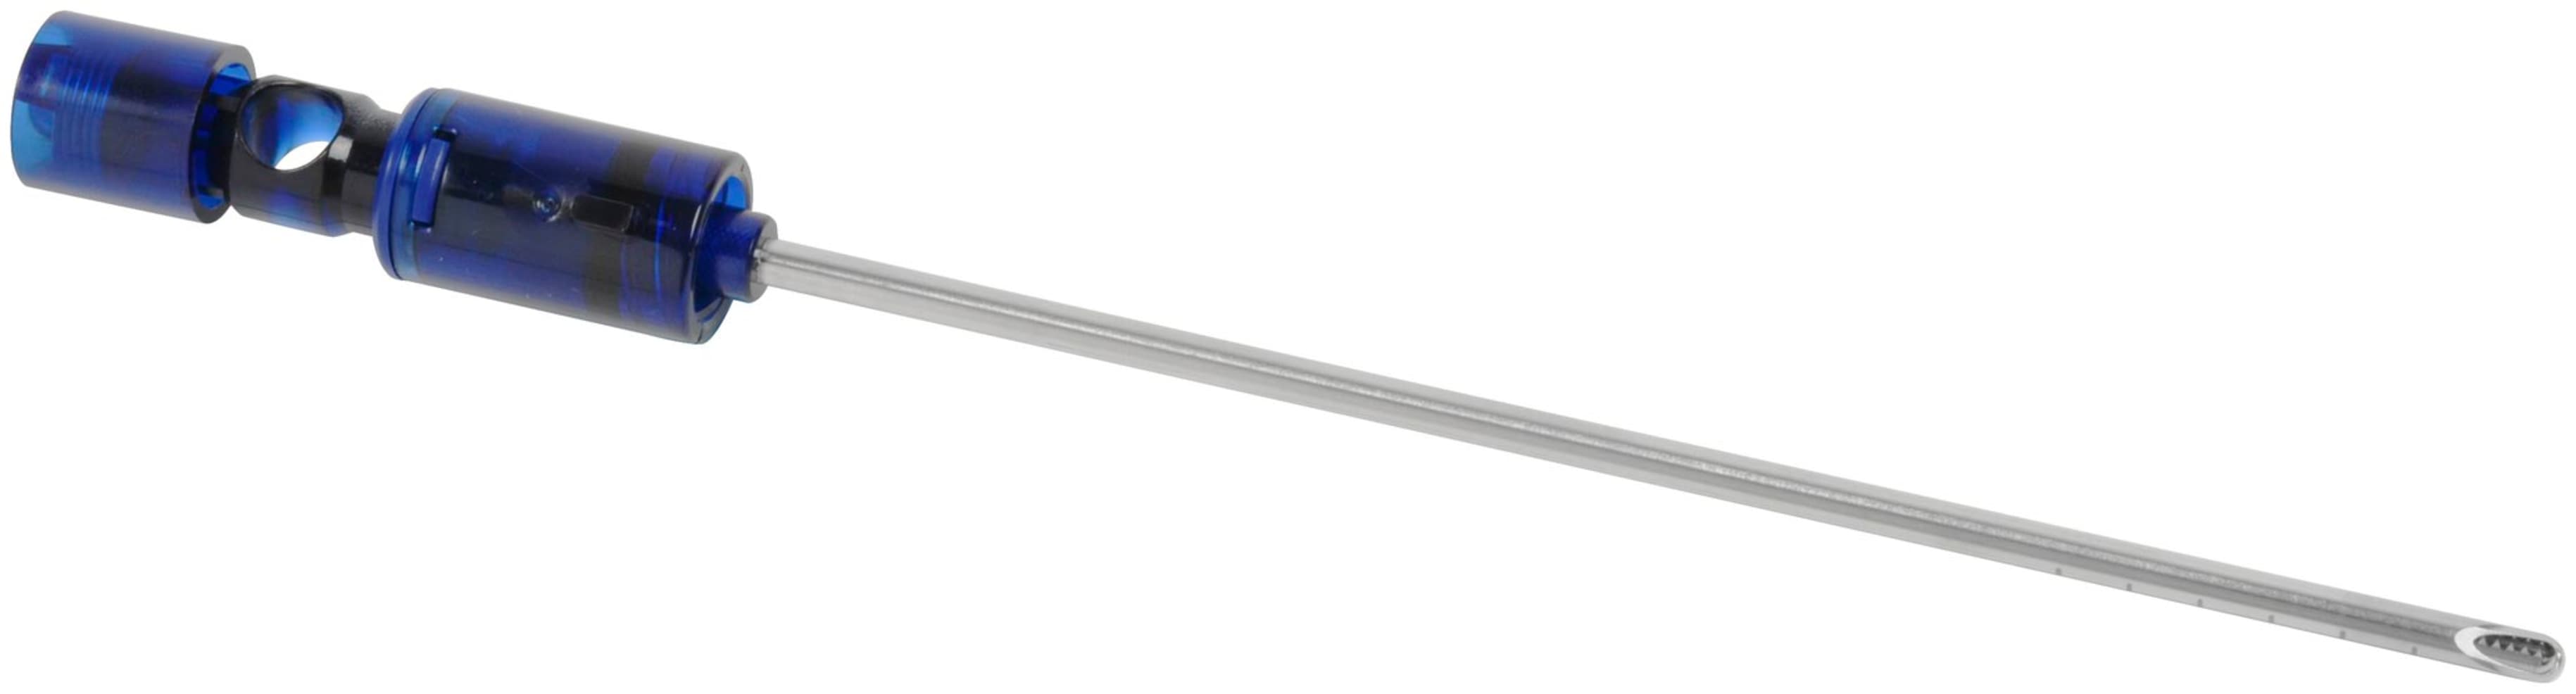 Dissector, 3.5 mm x 13 cm